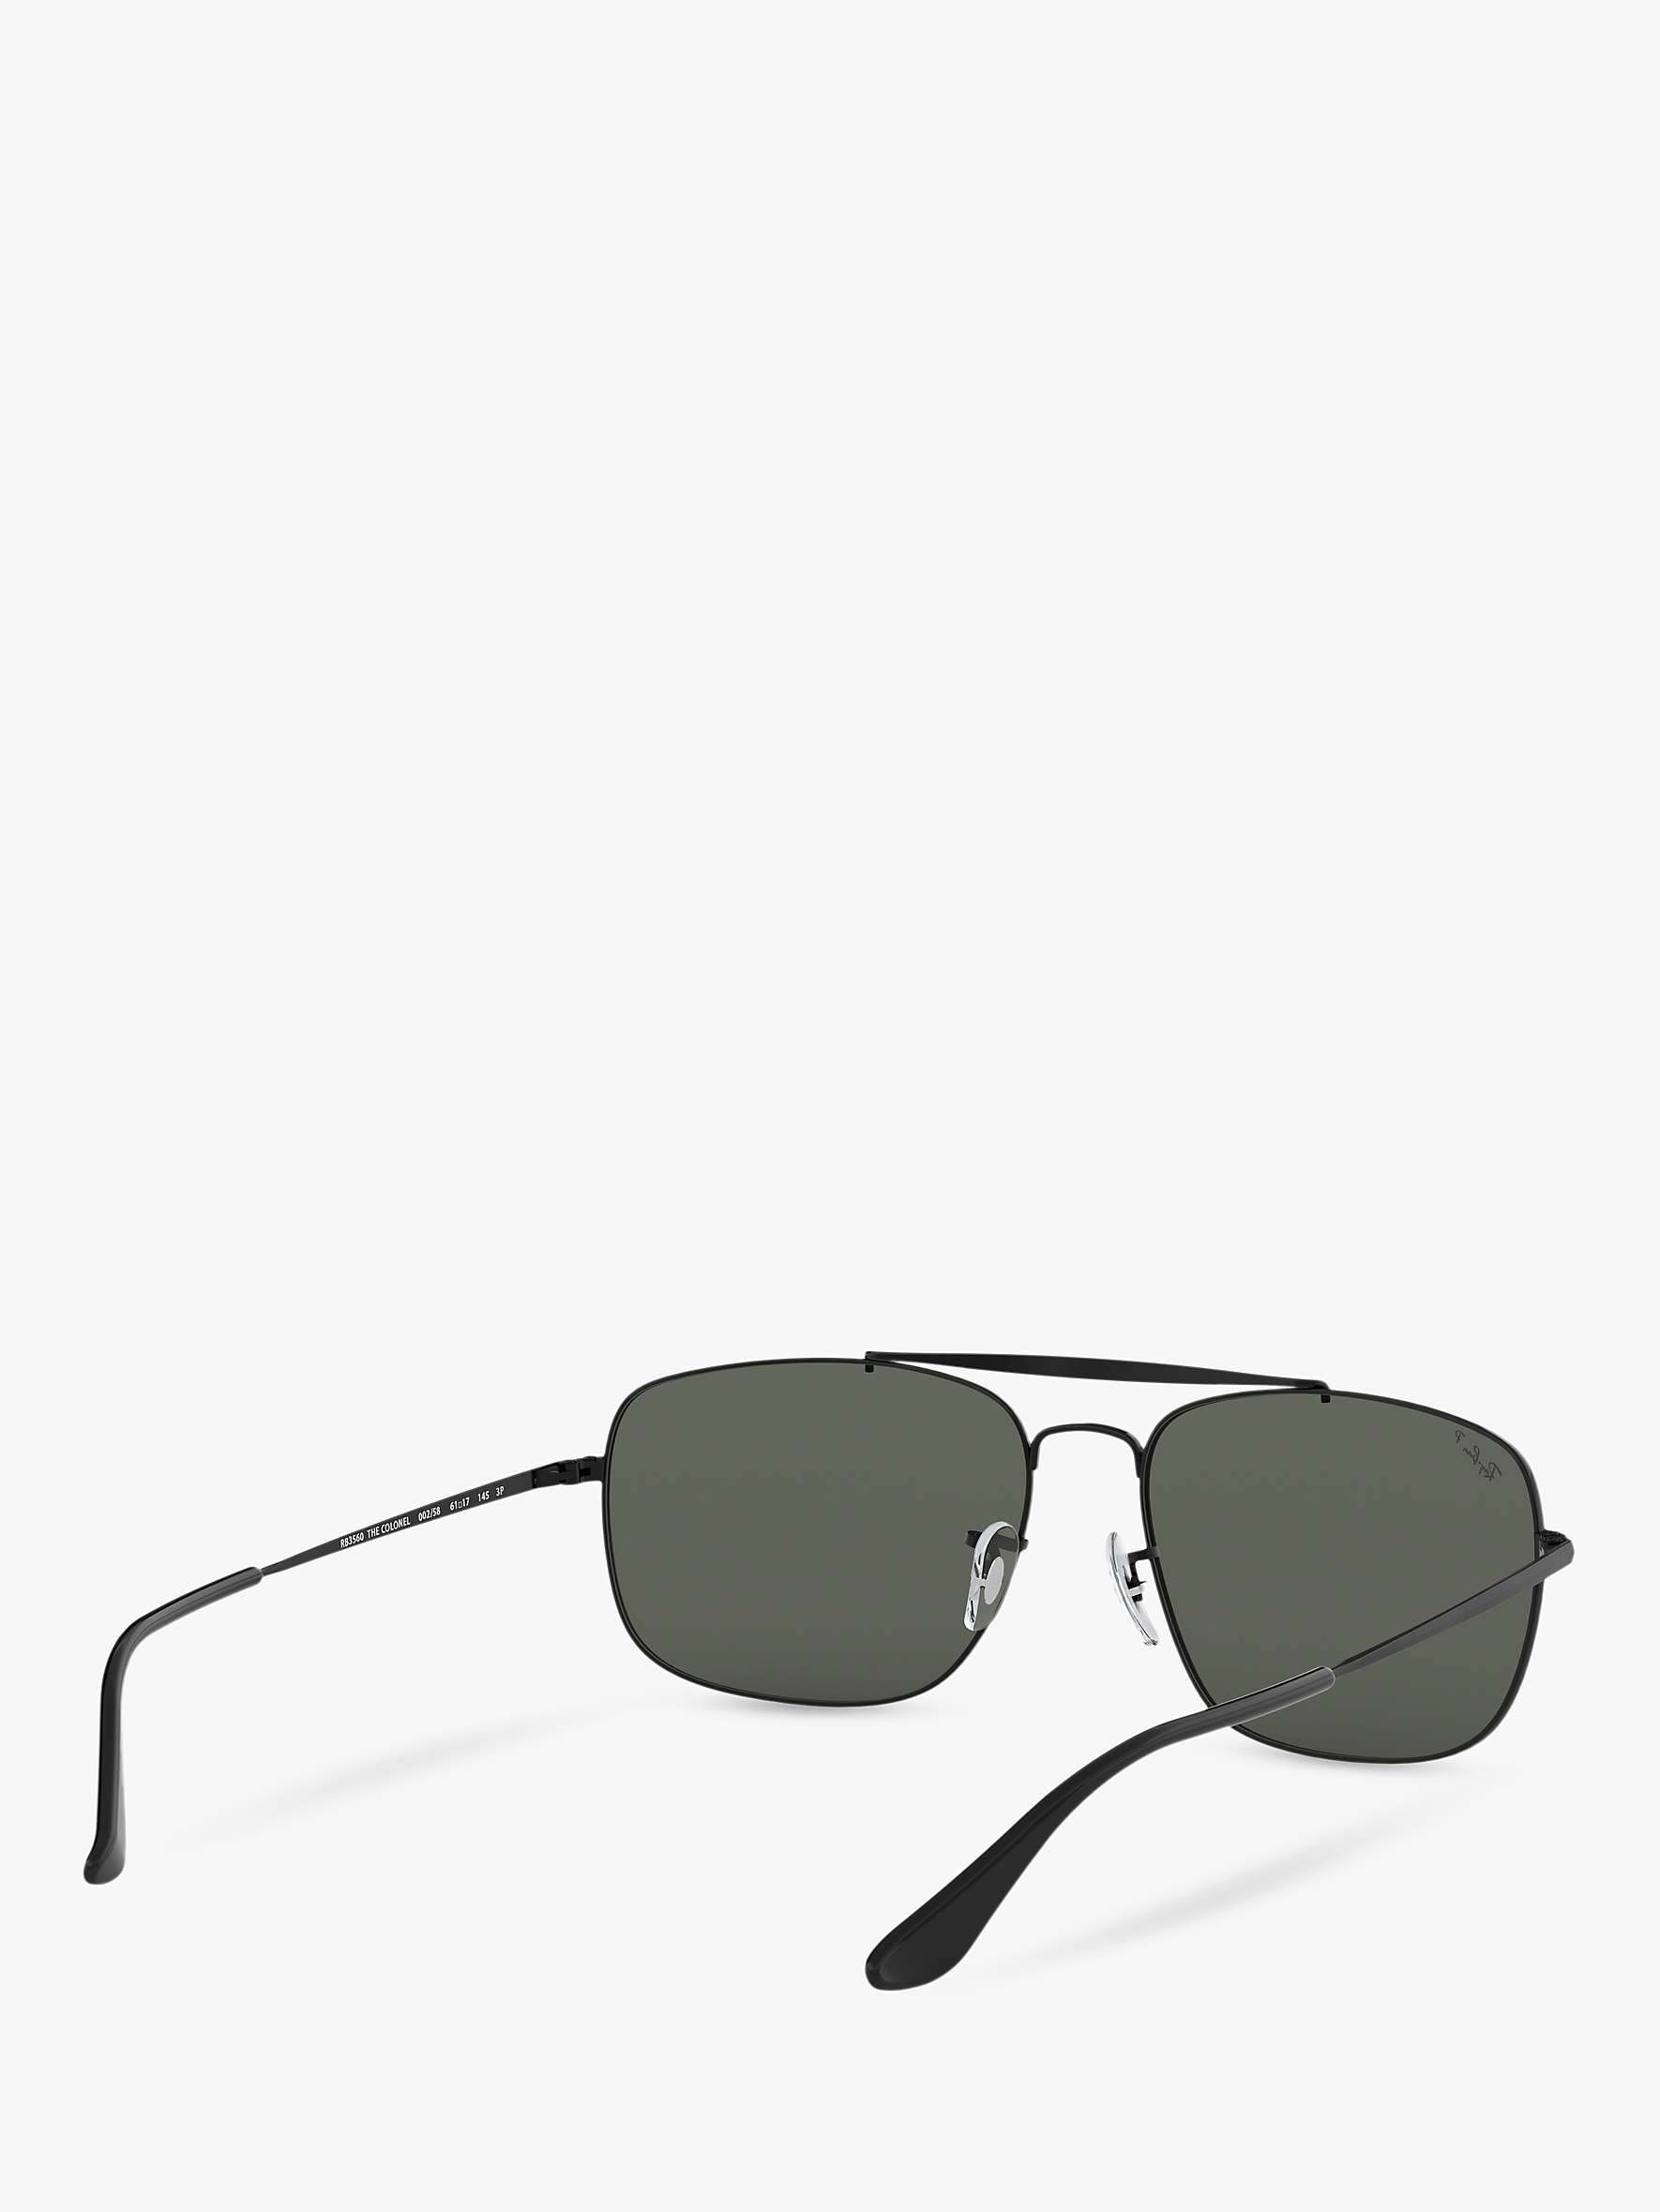 Buy Ray-Ban RB3560 Men's The Colonel Polarised Square Sunglasses, Black/Green Online at johnlewis.com